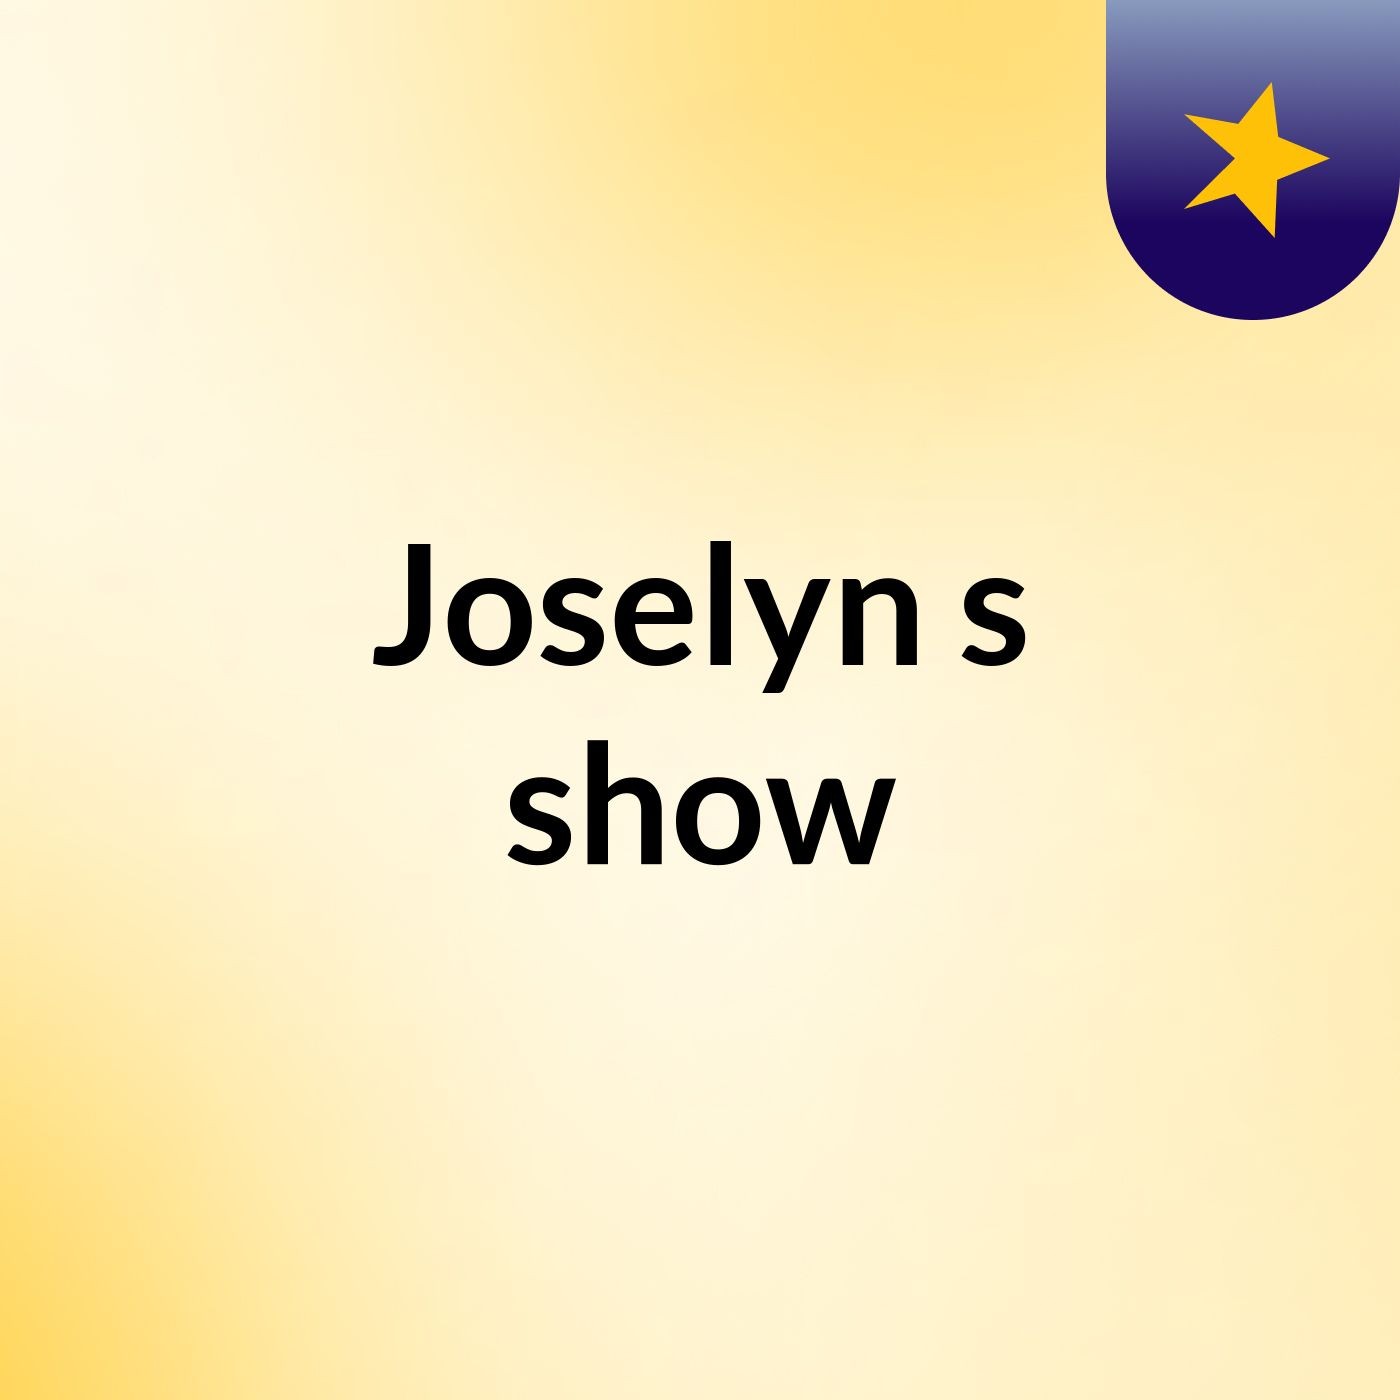 Joselyn's show